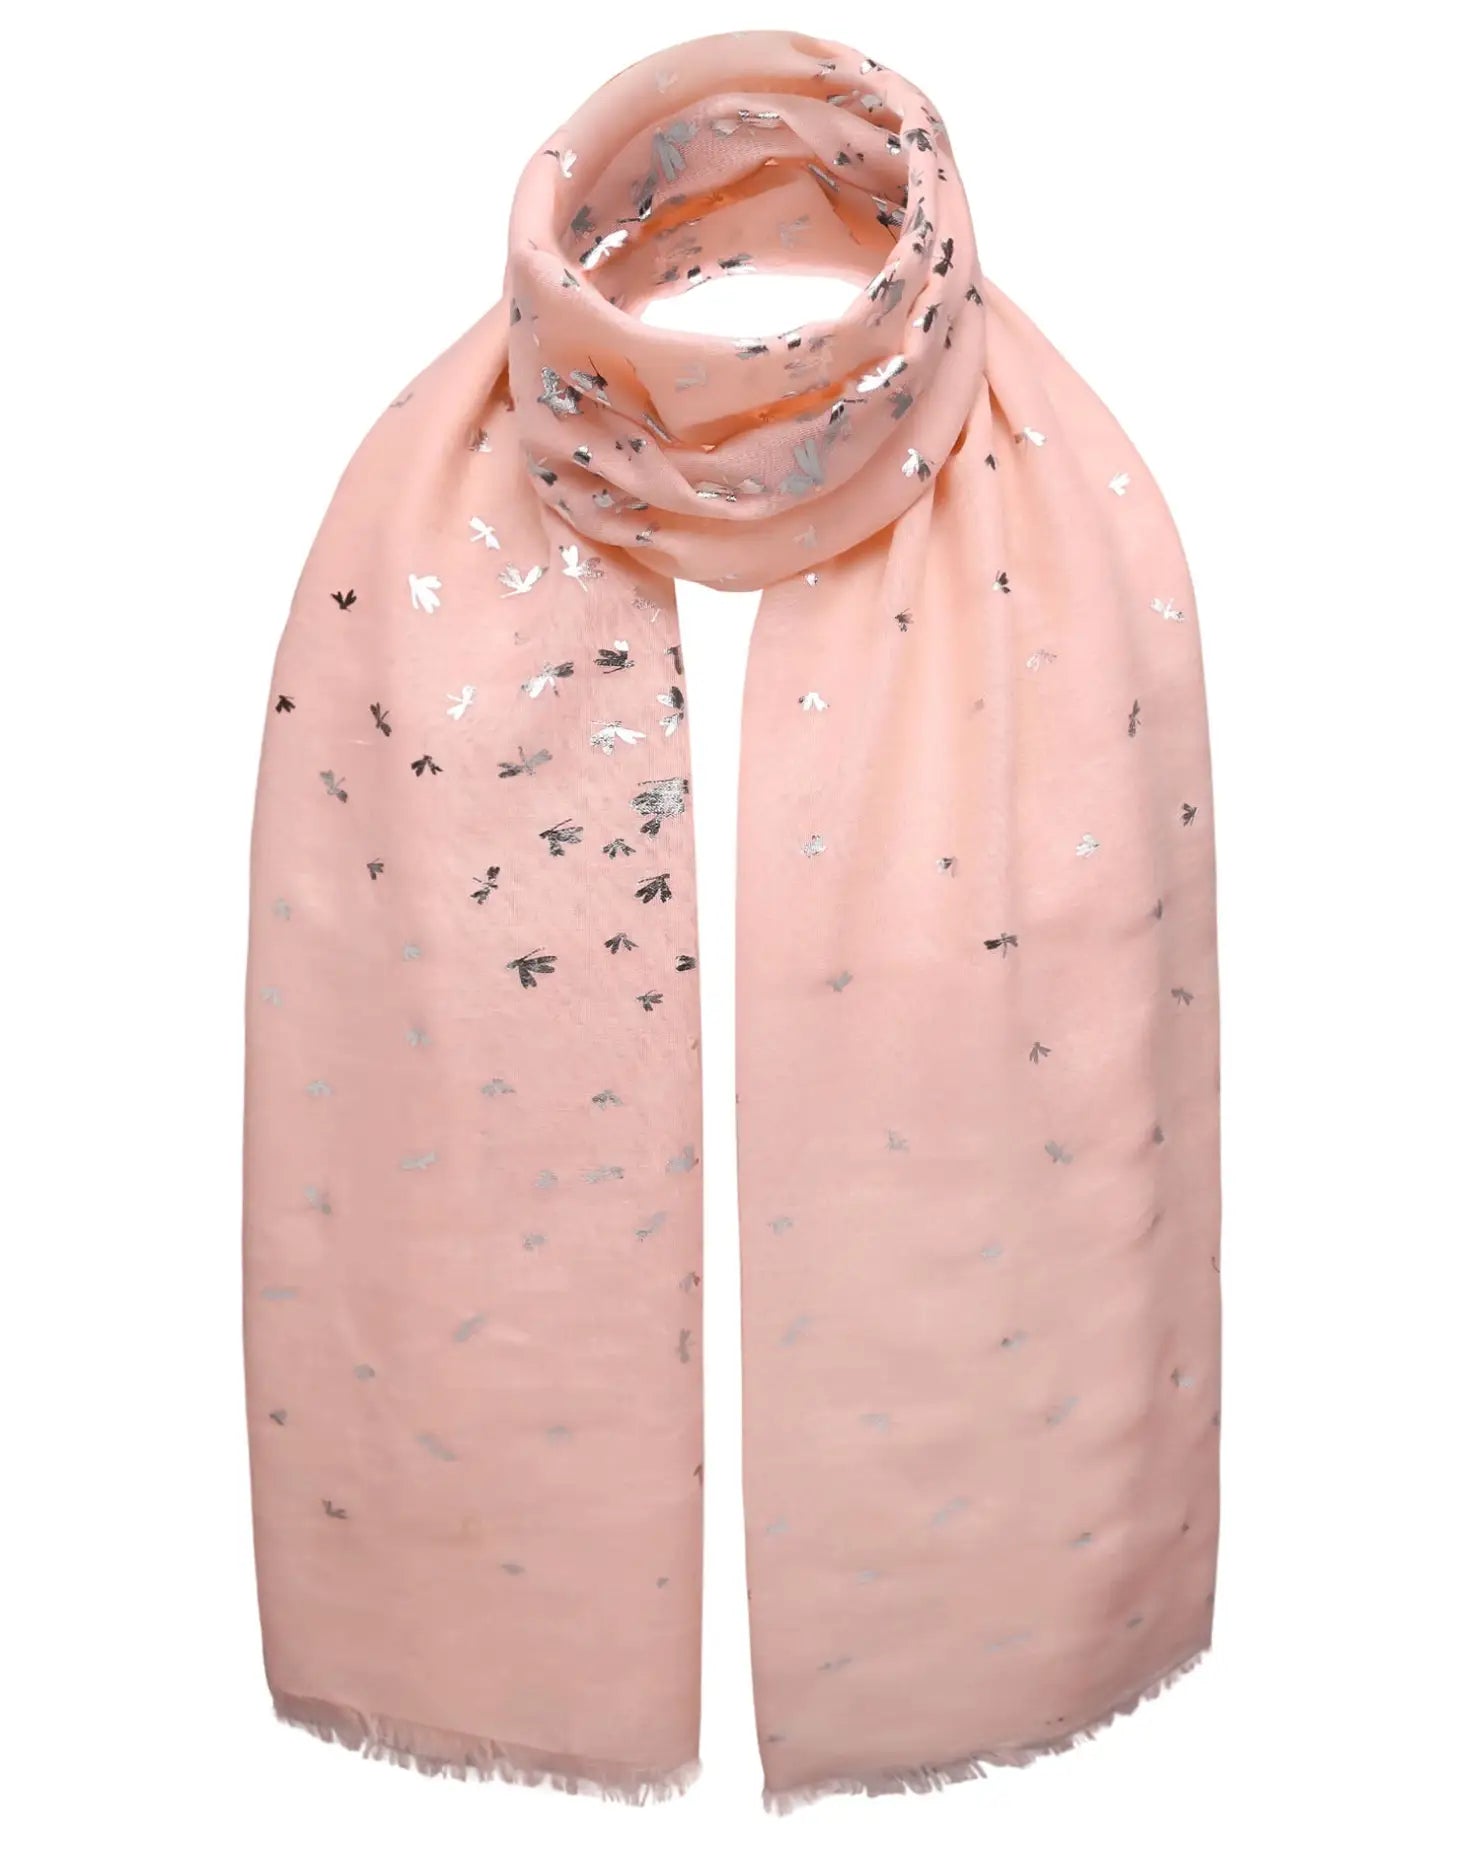 Dragonfly foil print pink scarf